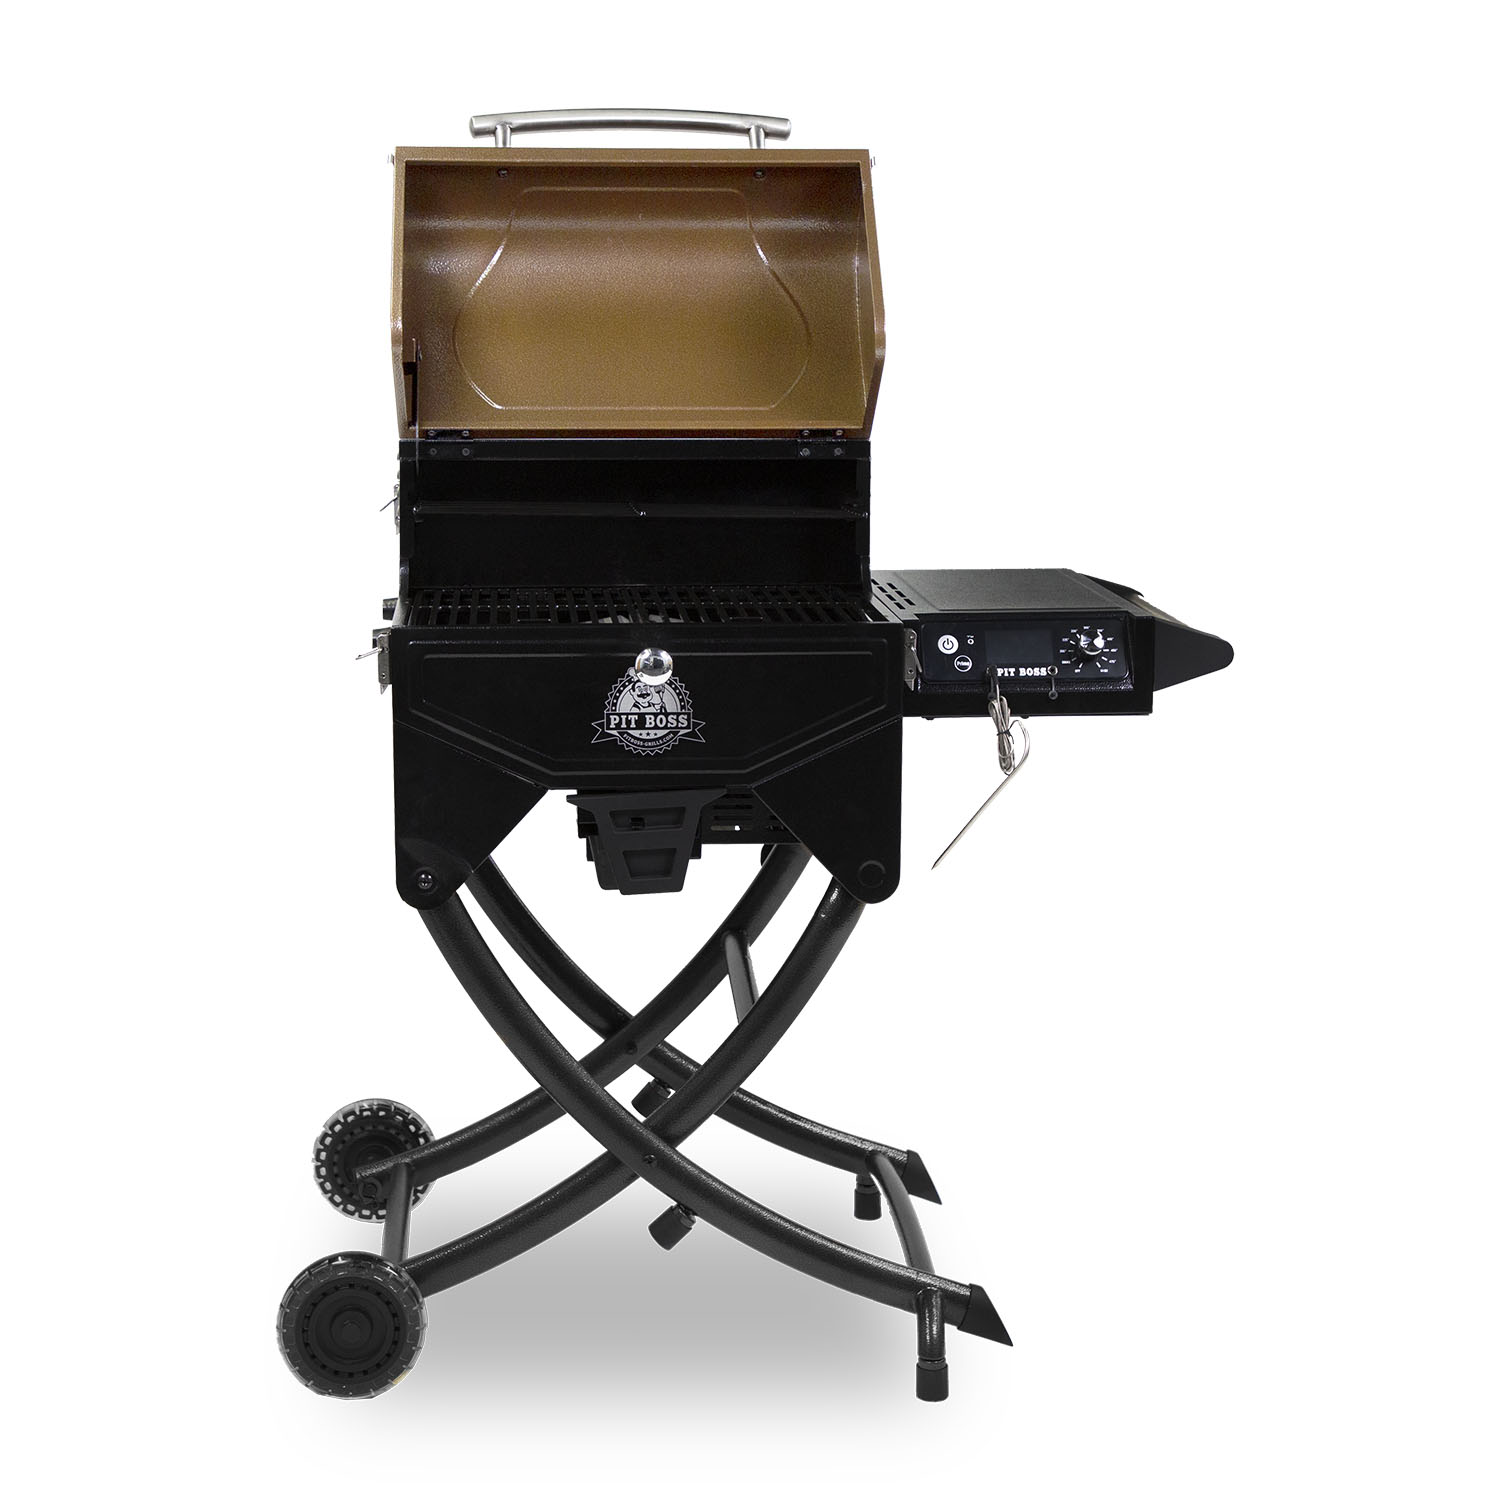 Pit Boss Portable Wood Pellet Grill, Pit Stop Smoker with foldable legs - image 2 of 8